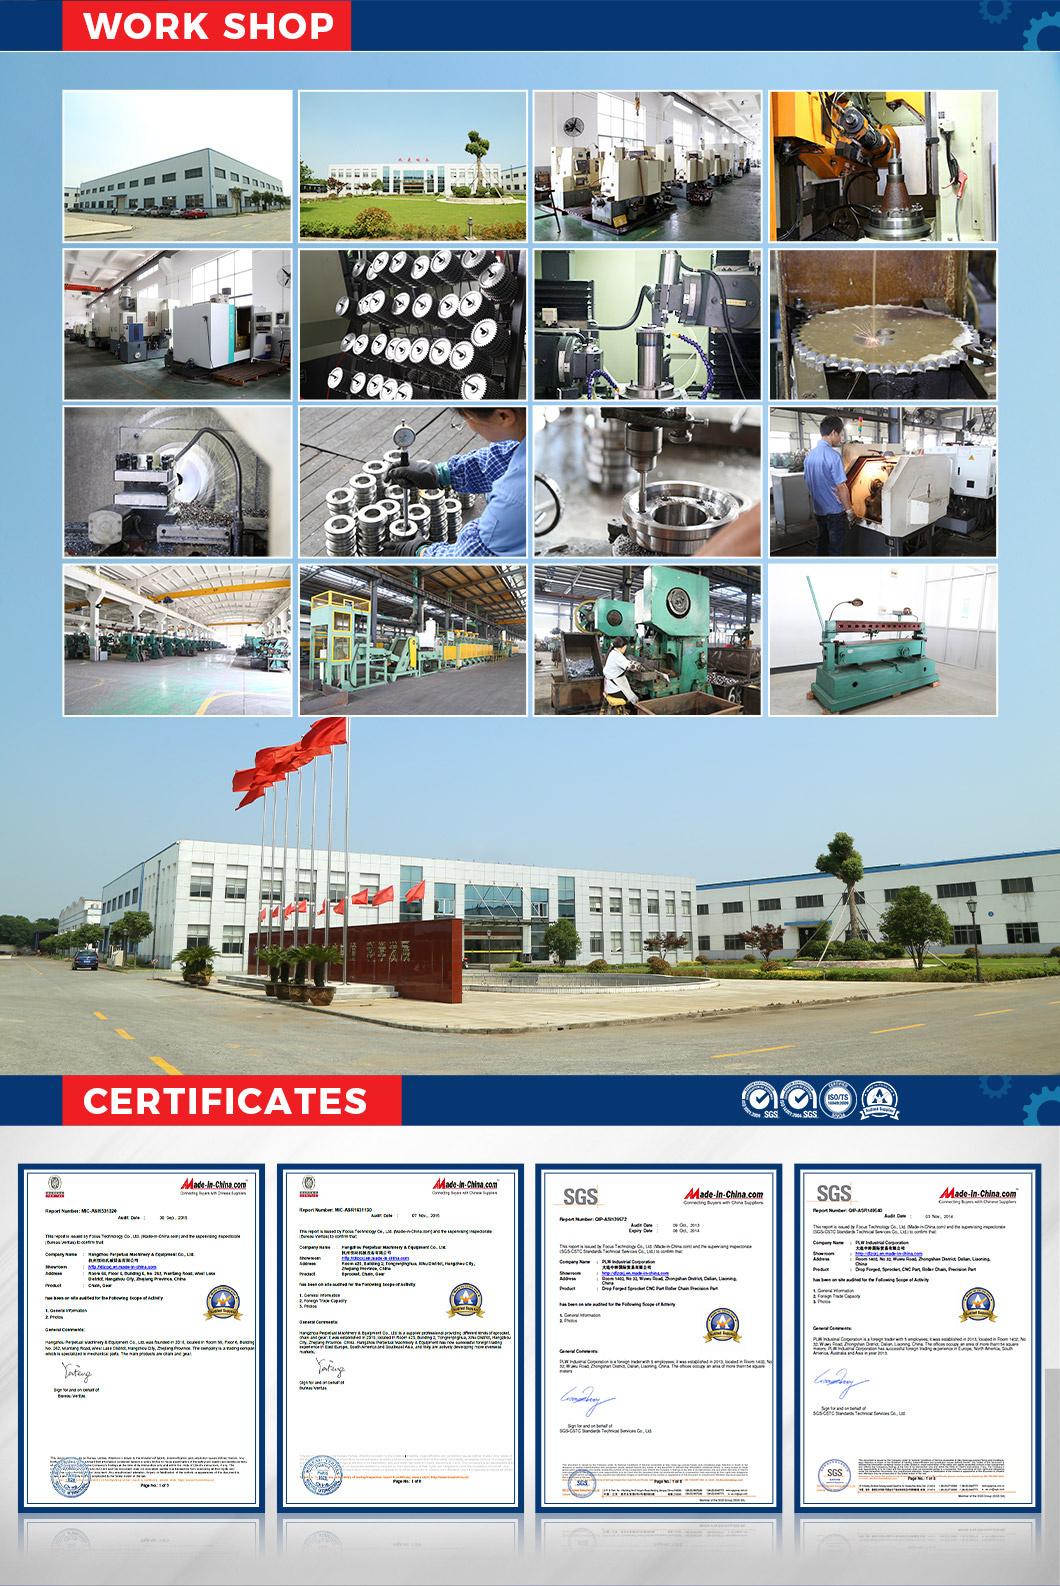 Factory Direct Sales Alloy Steel Material Agricultural Conveyor Chain